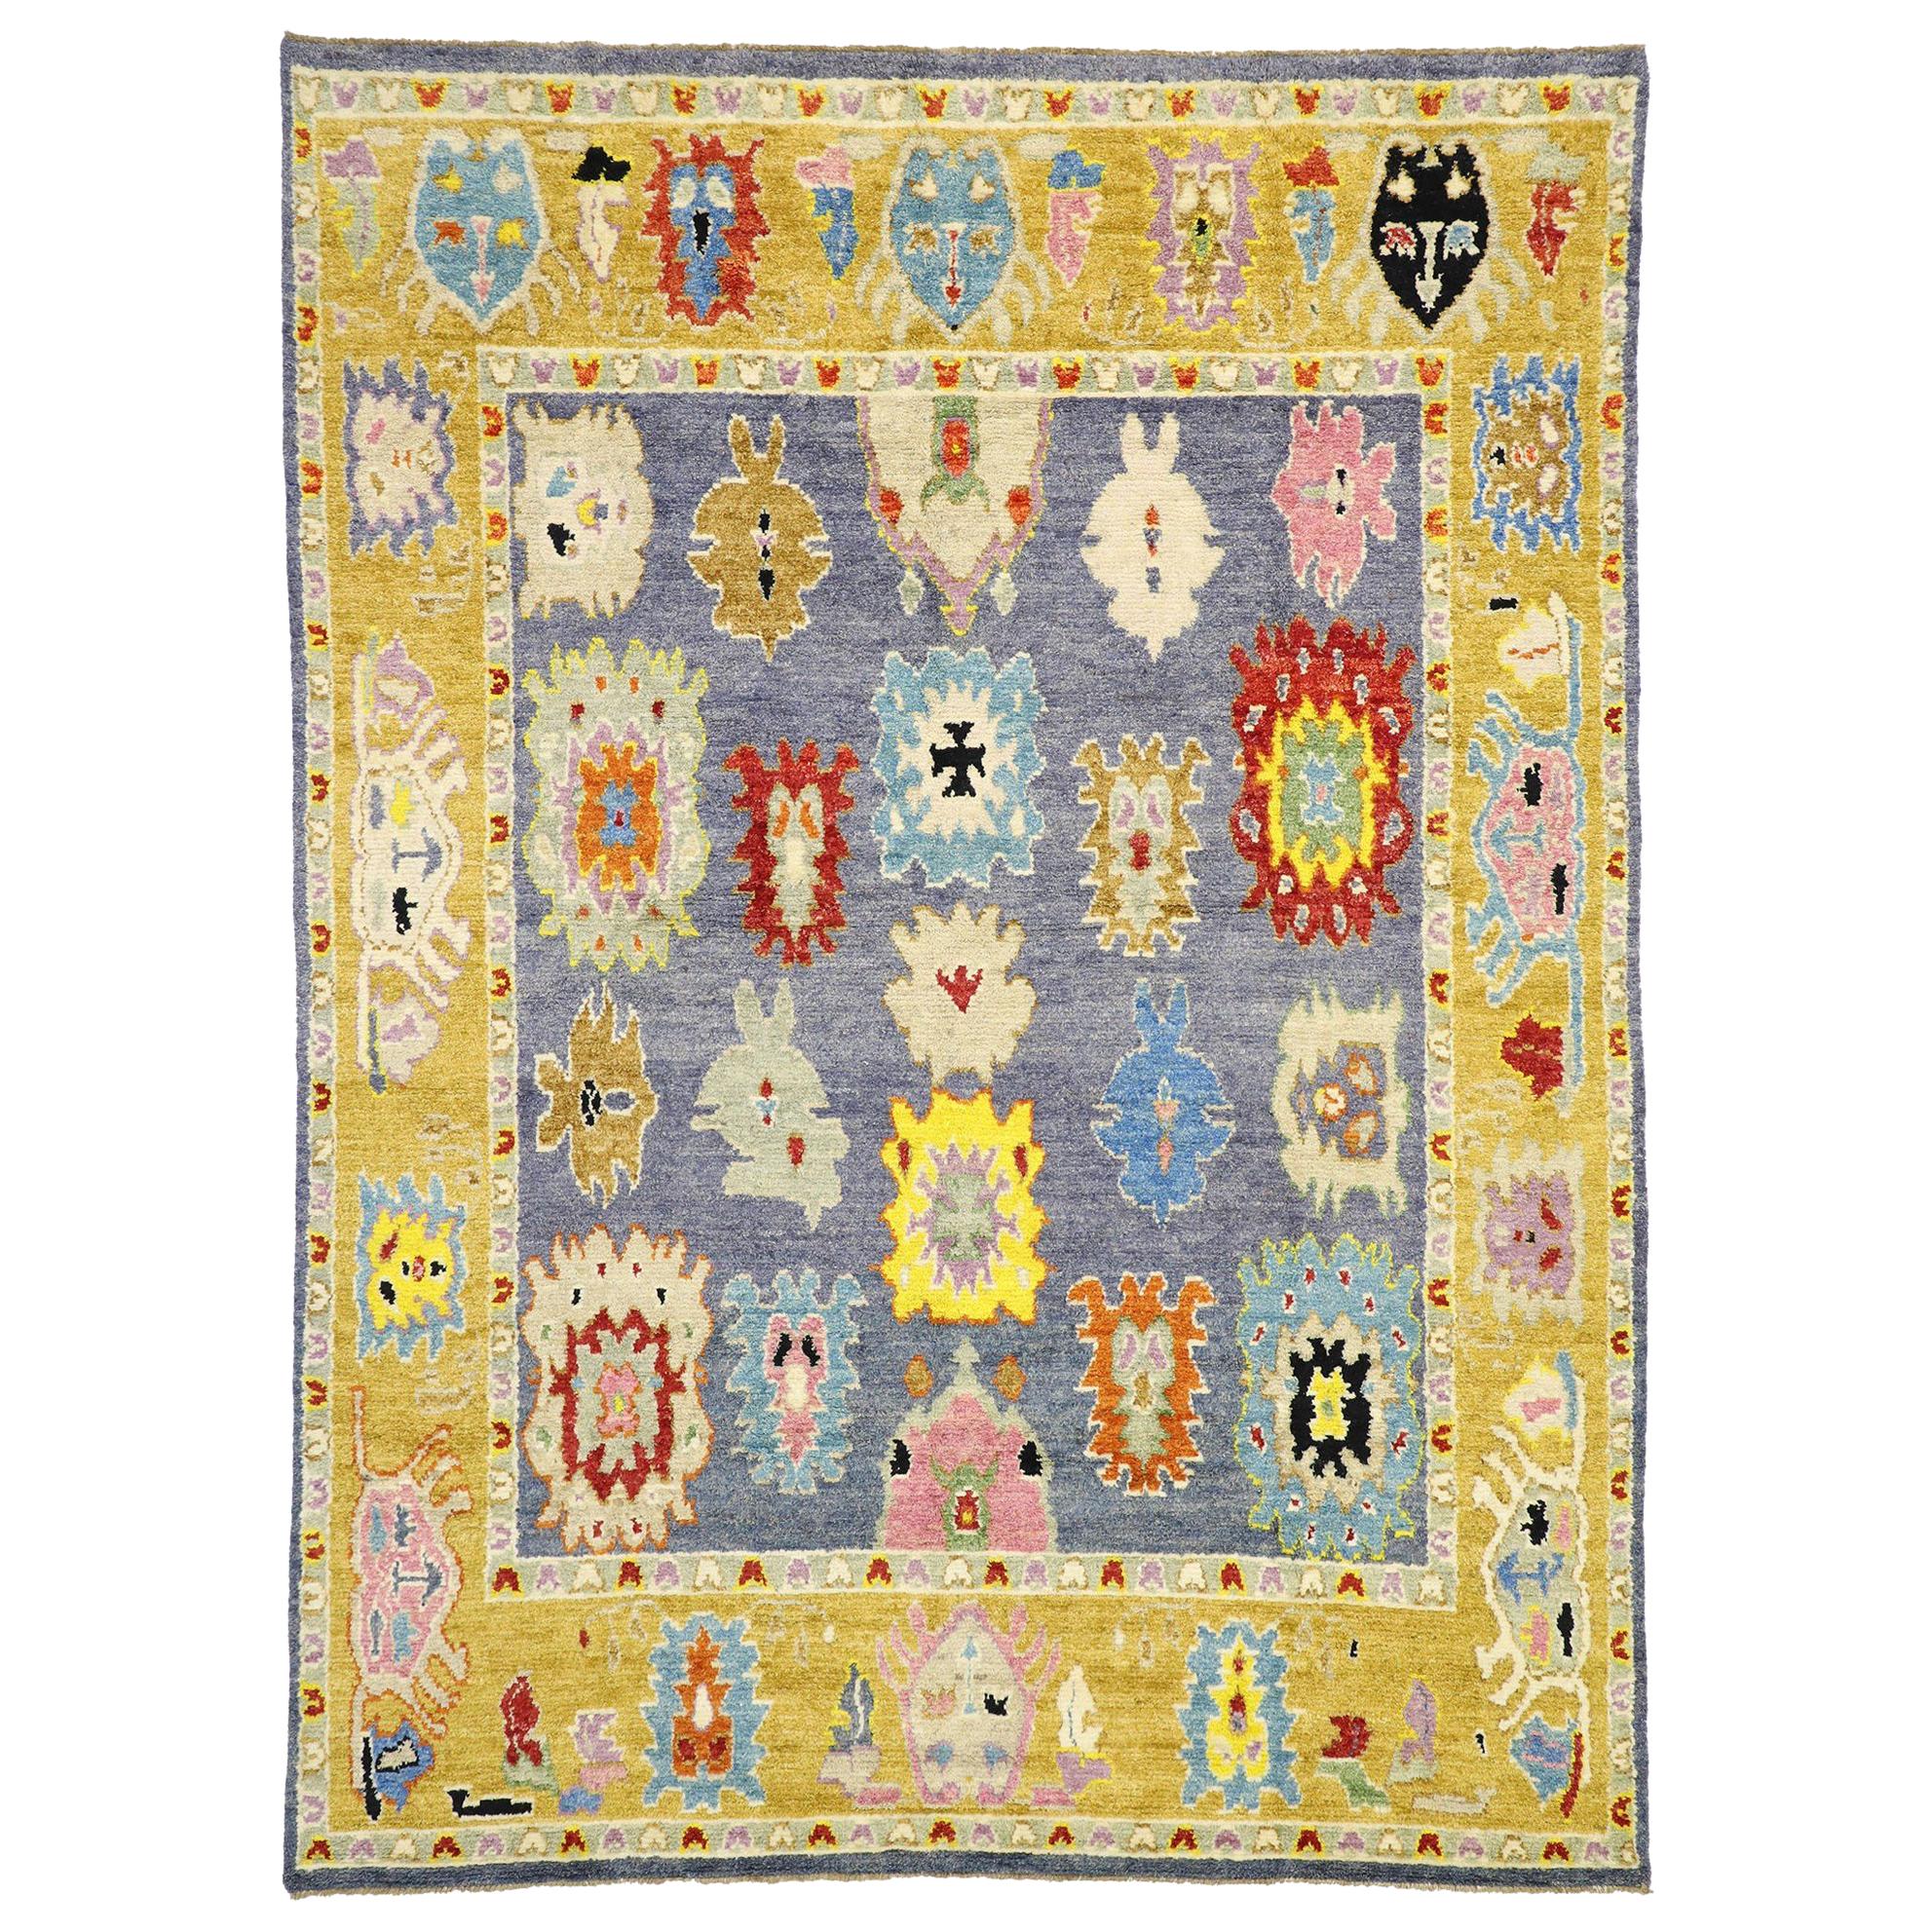 Contemporary Moroccan Area Rug with Oushak Design Pattern and Memphis Style